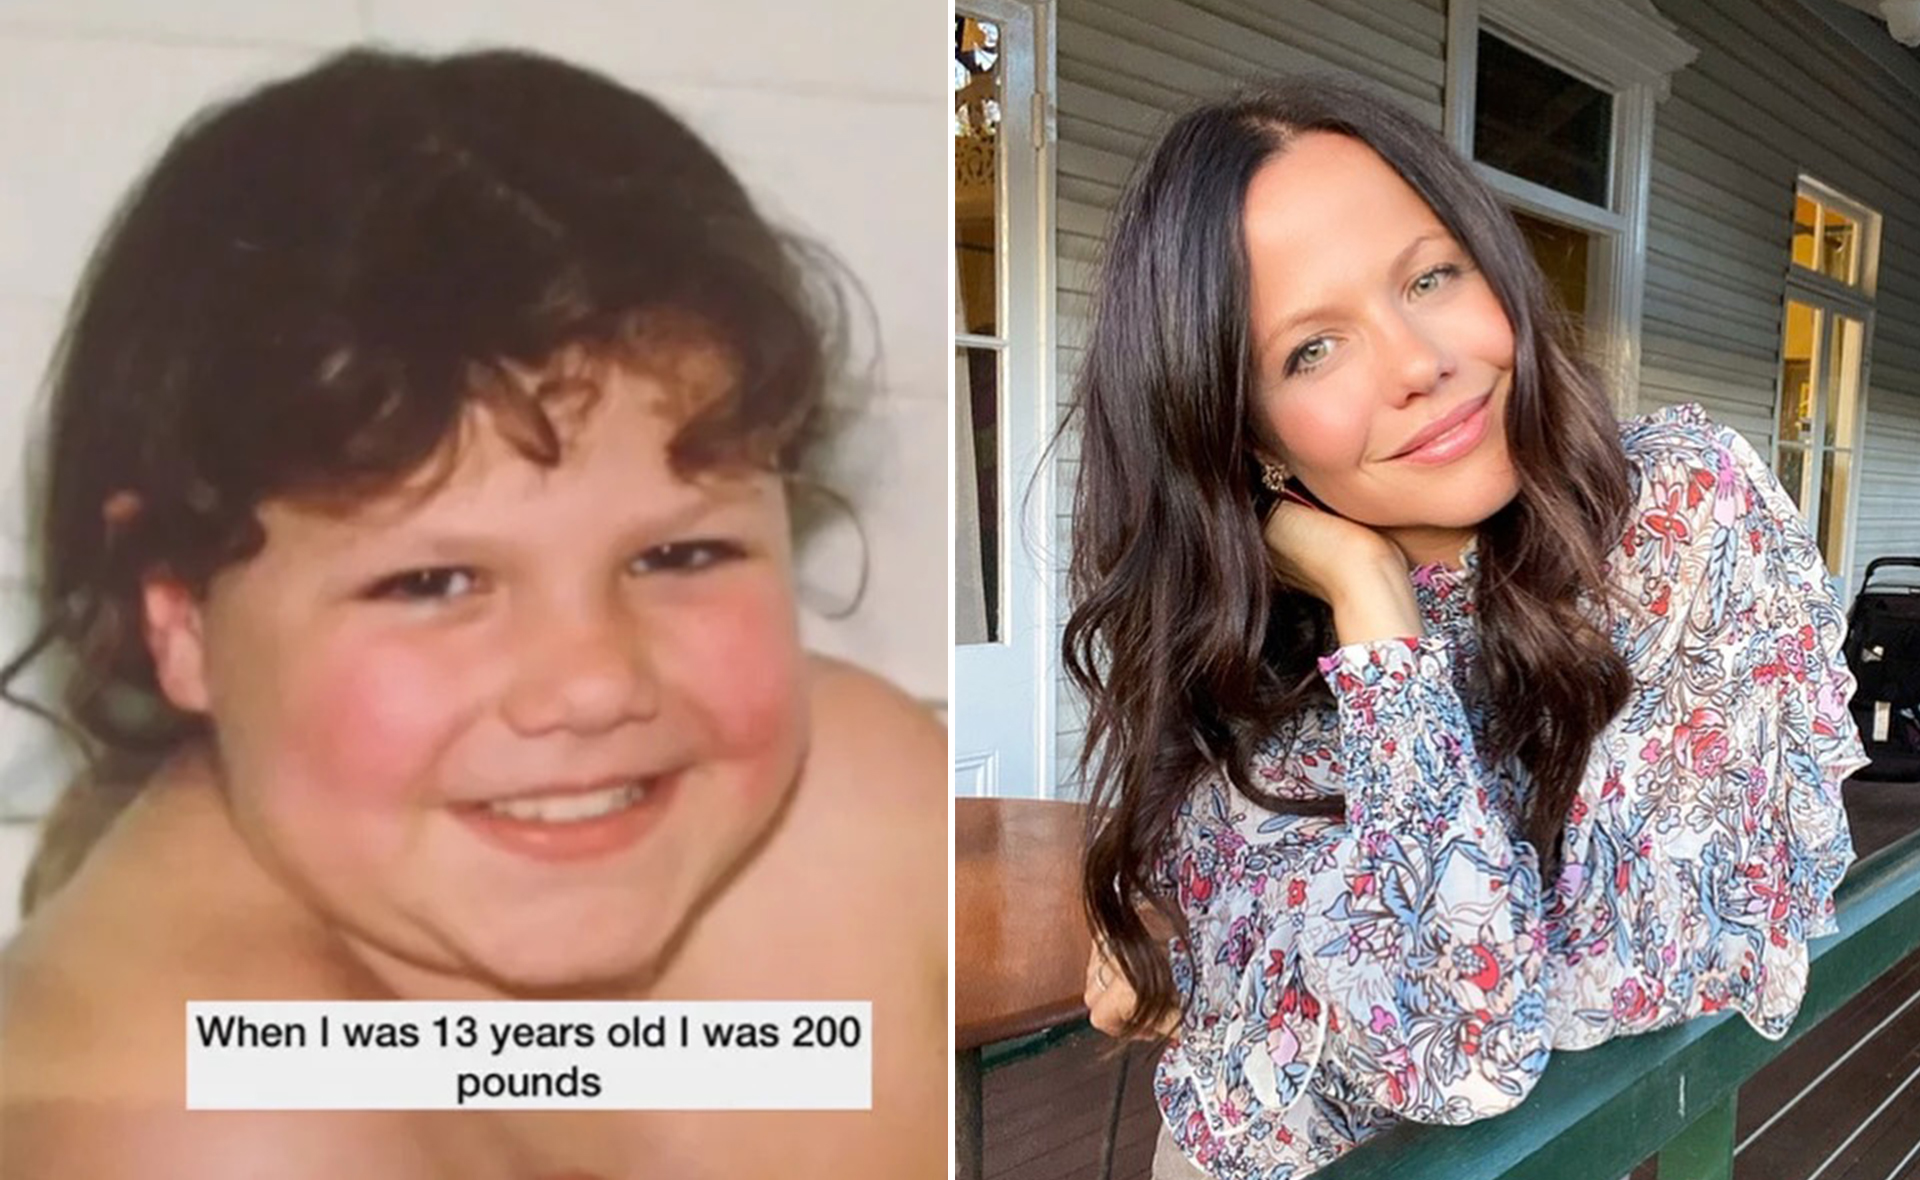 Home and Away alum Tammin Sursok reveals the cruel taunts she copped from bullies as a kid